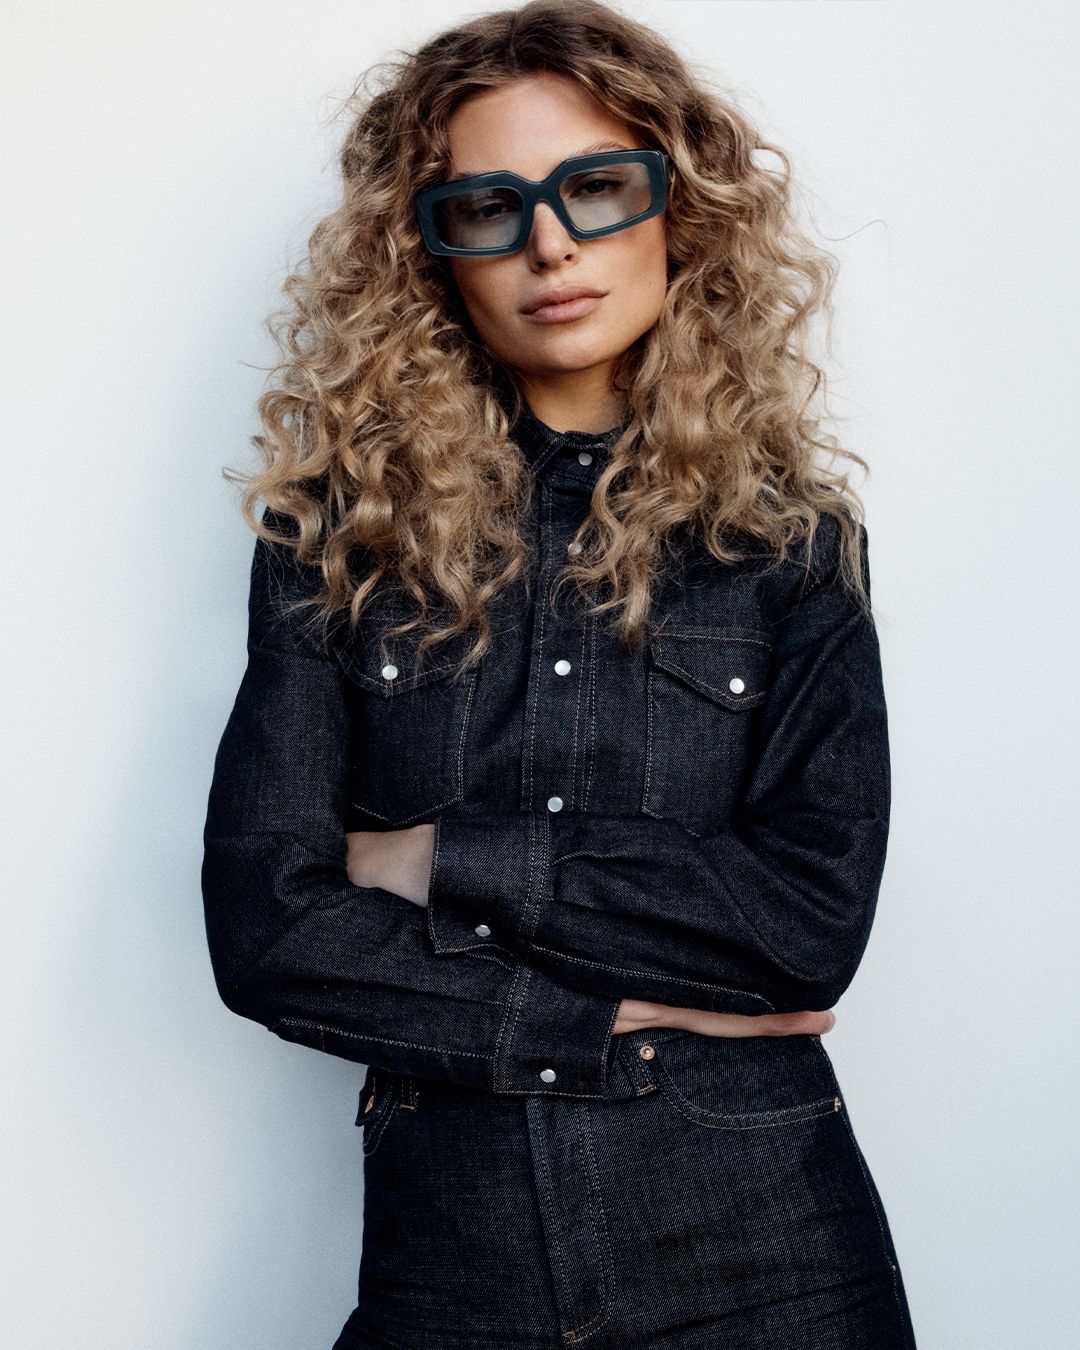 Model standing with arms crossed wearing blue sunglasses with dark blue denim shirt and jeans